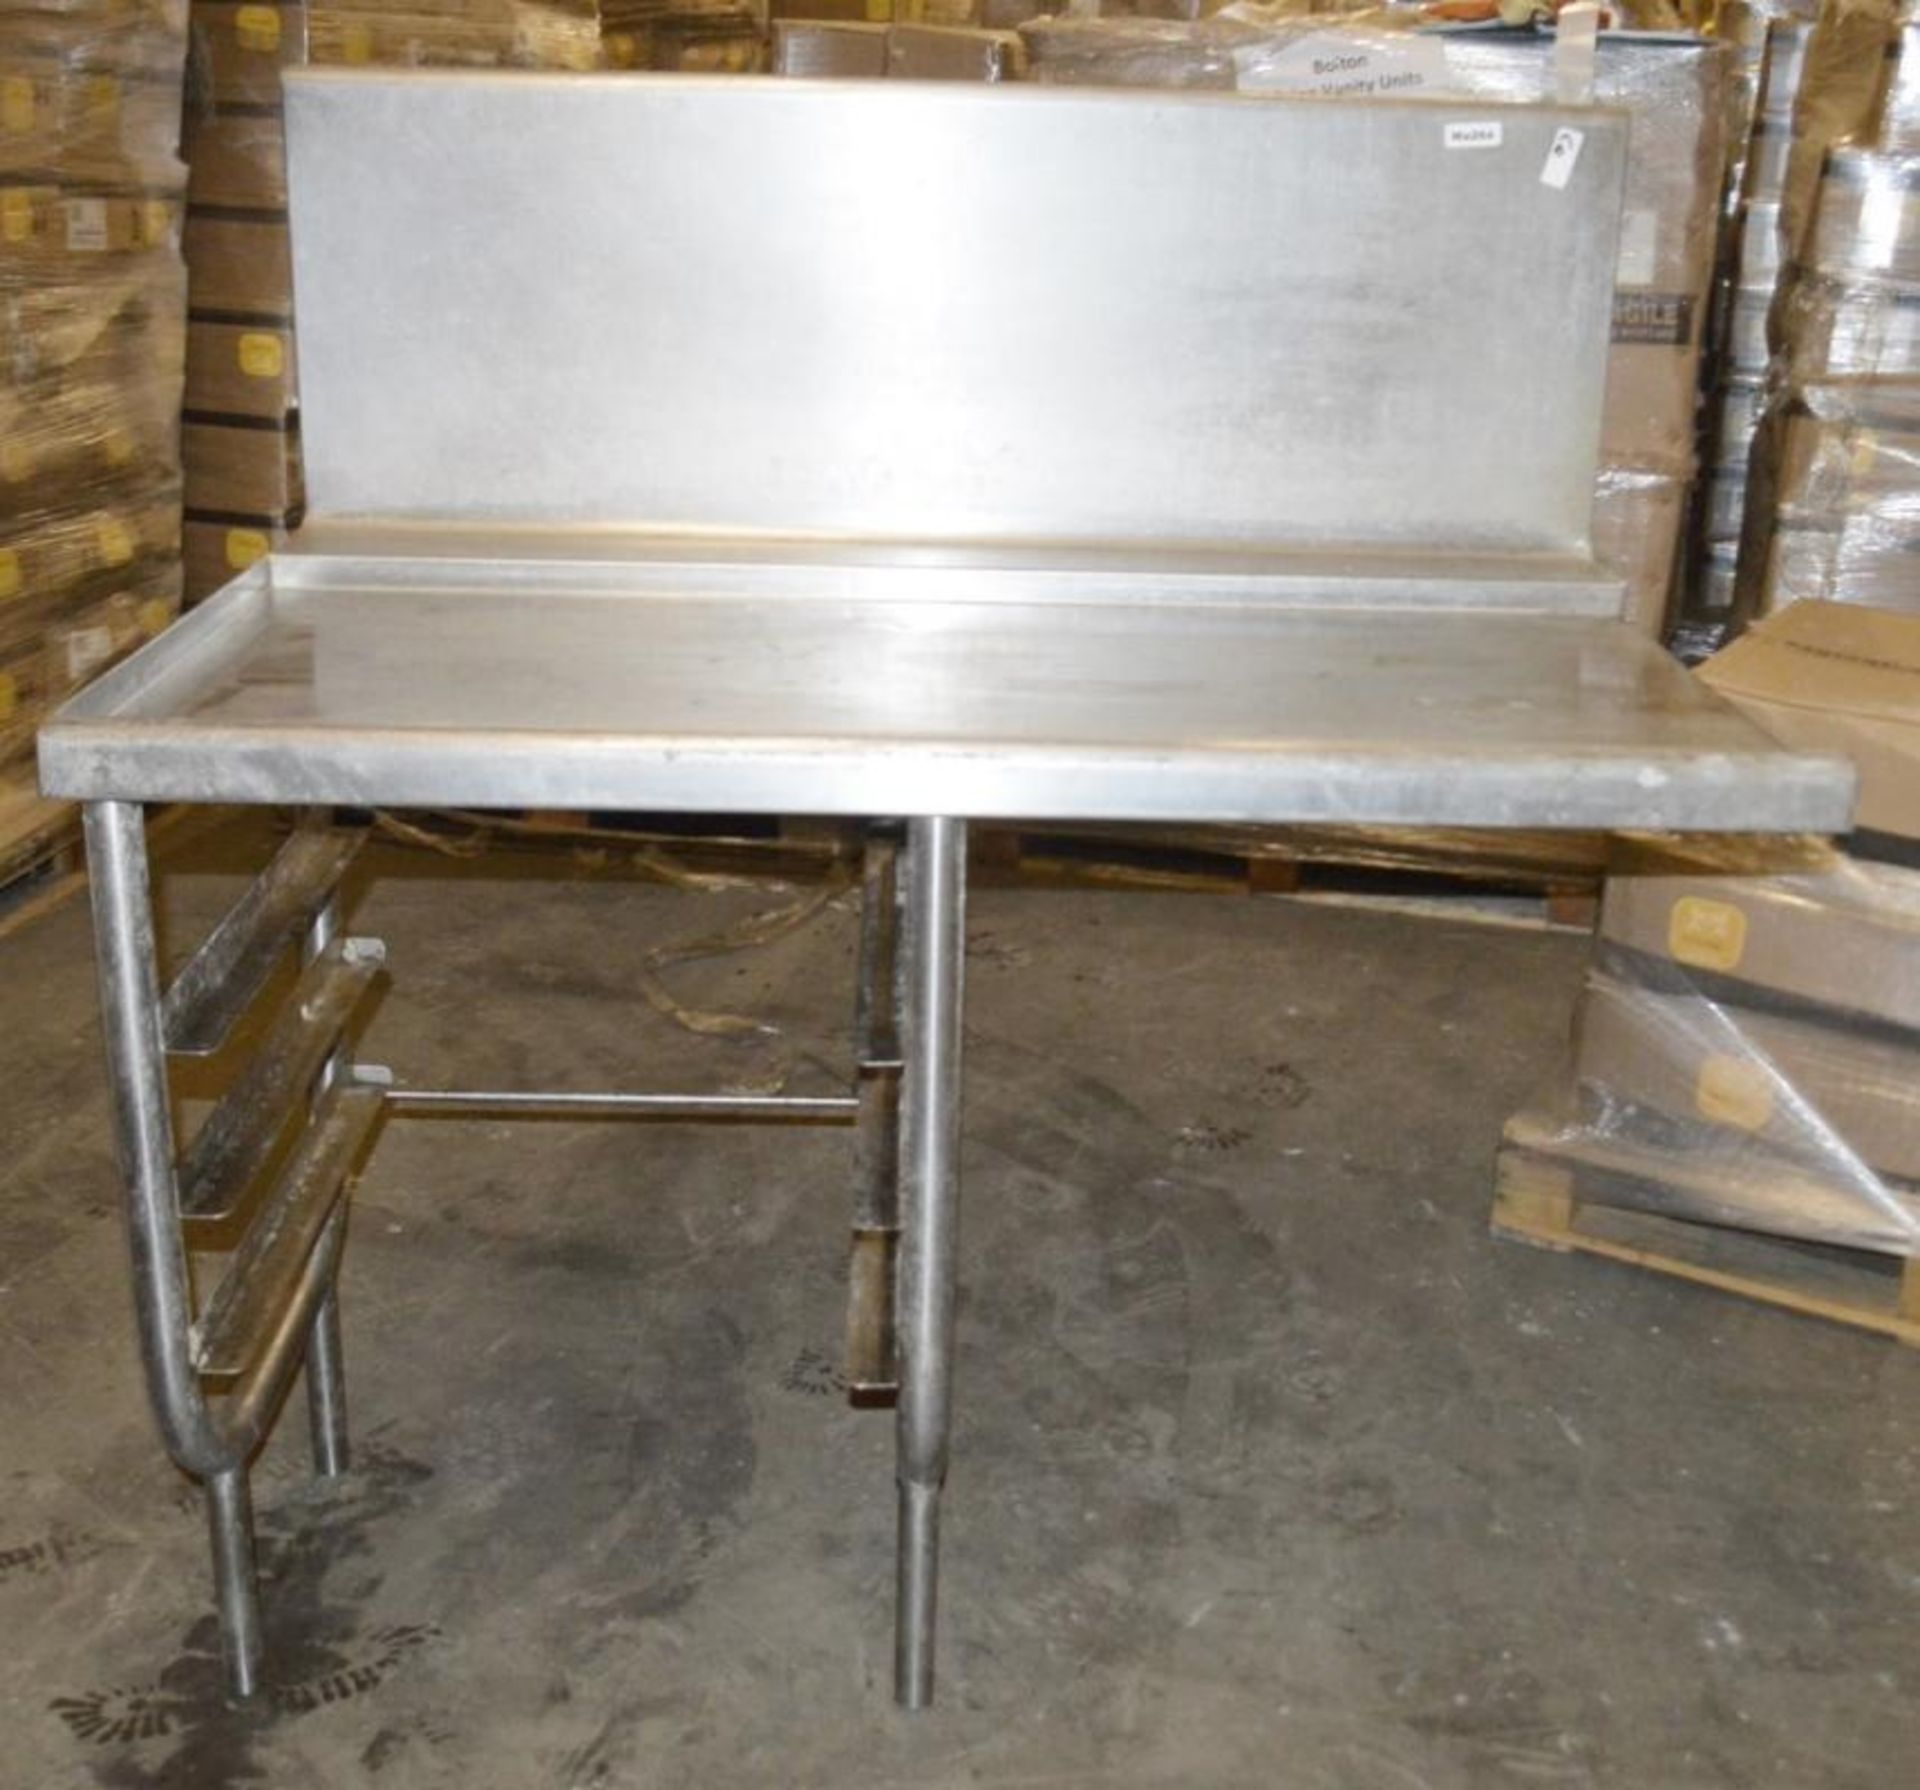 1 x Stainless Steel Prep Table / Tray Store - Dimensions: W120 x 76 x H126cm - £1 Start, No Reserve